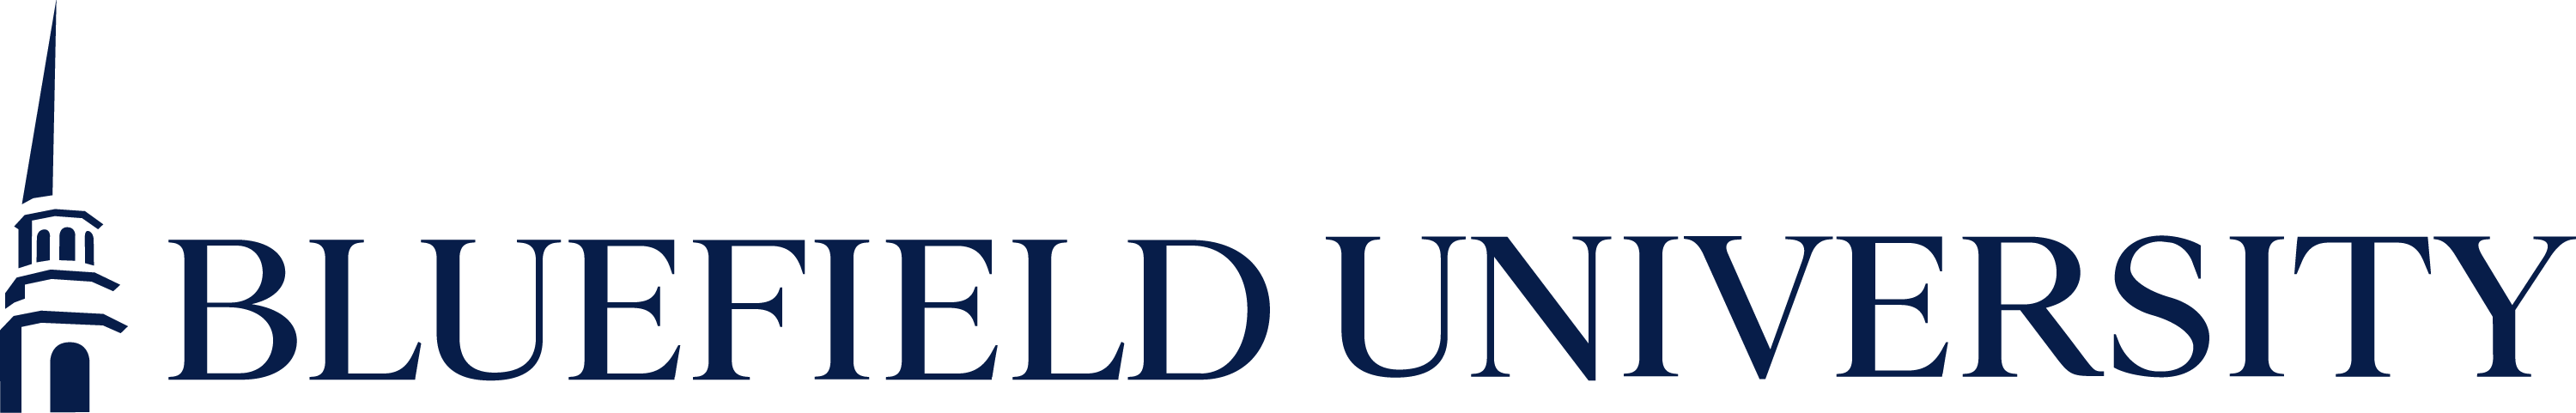 Bluefield University logo with chapel on left horizontal in blue.